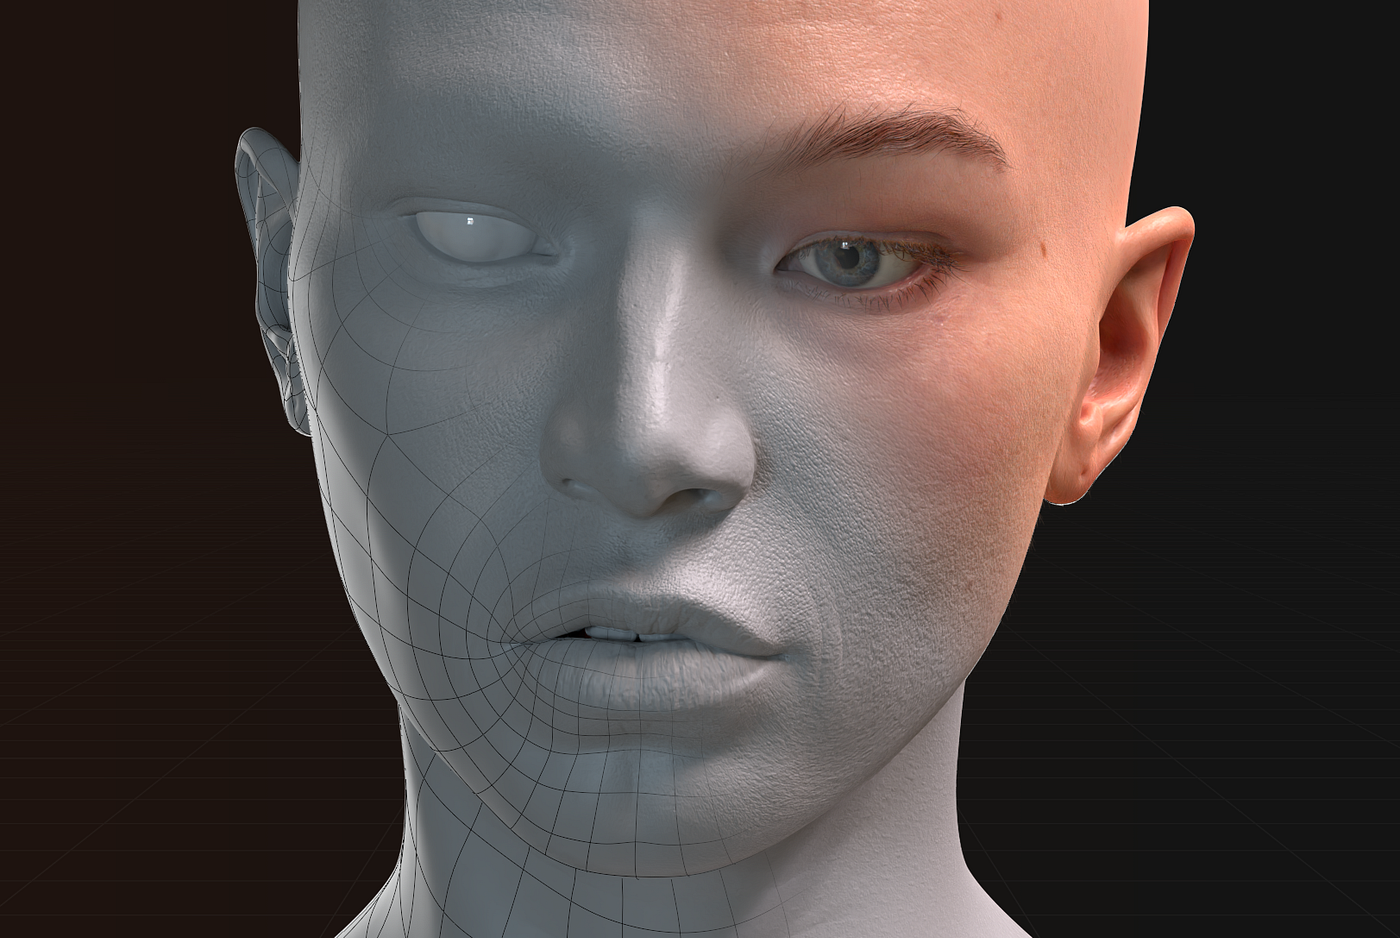 Learning to sculpt faces. Use clear references. Observe them…